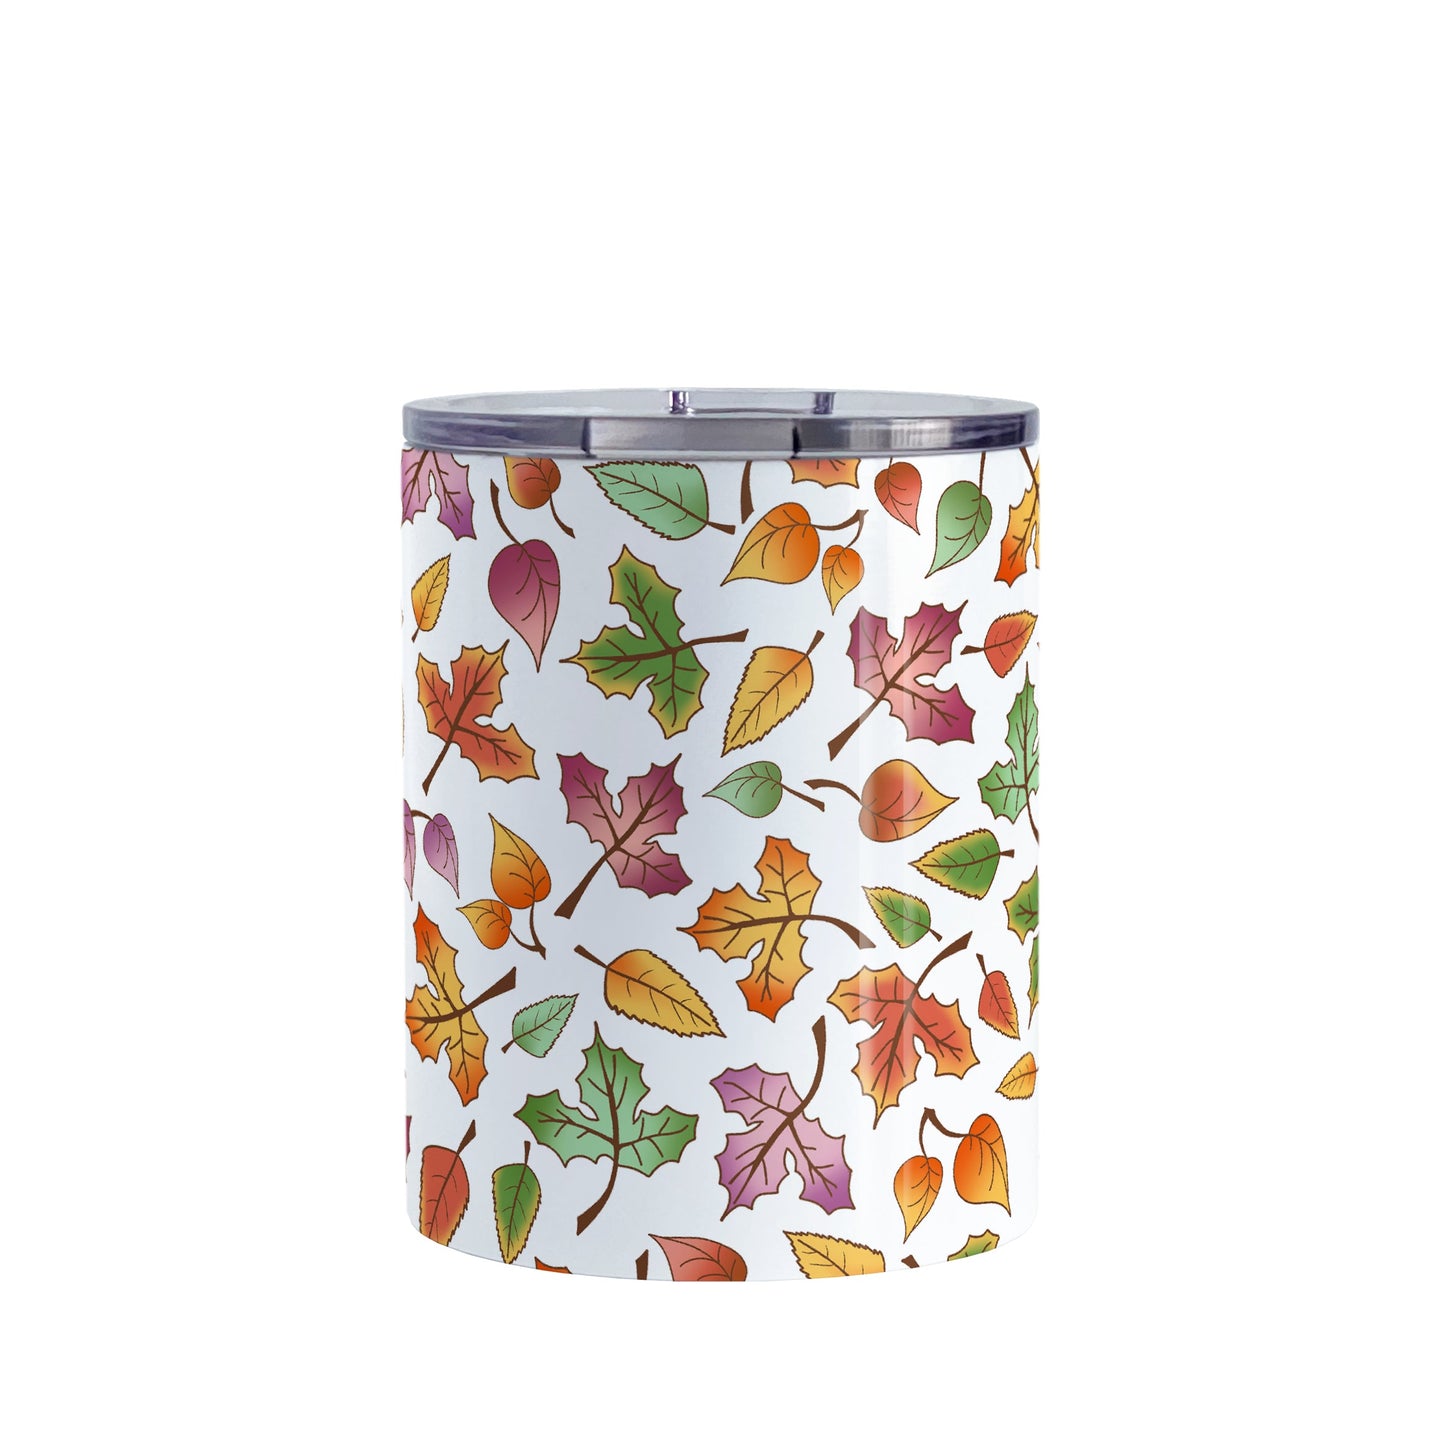 Changing Leaves Fall Tumbler Cup (10oz) at Amy's Coffee Mugs. A stainless steel tumbler cup designed with a fall themed pattern of leaves changing colors, as they do at the beginning of autumn, that wraps around the cup.